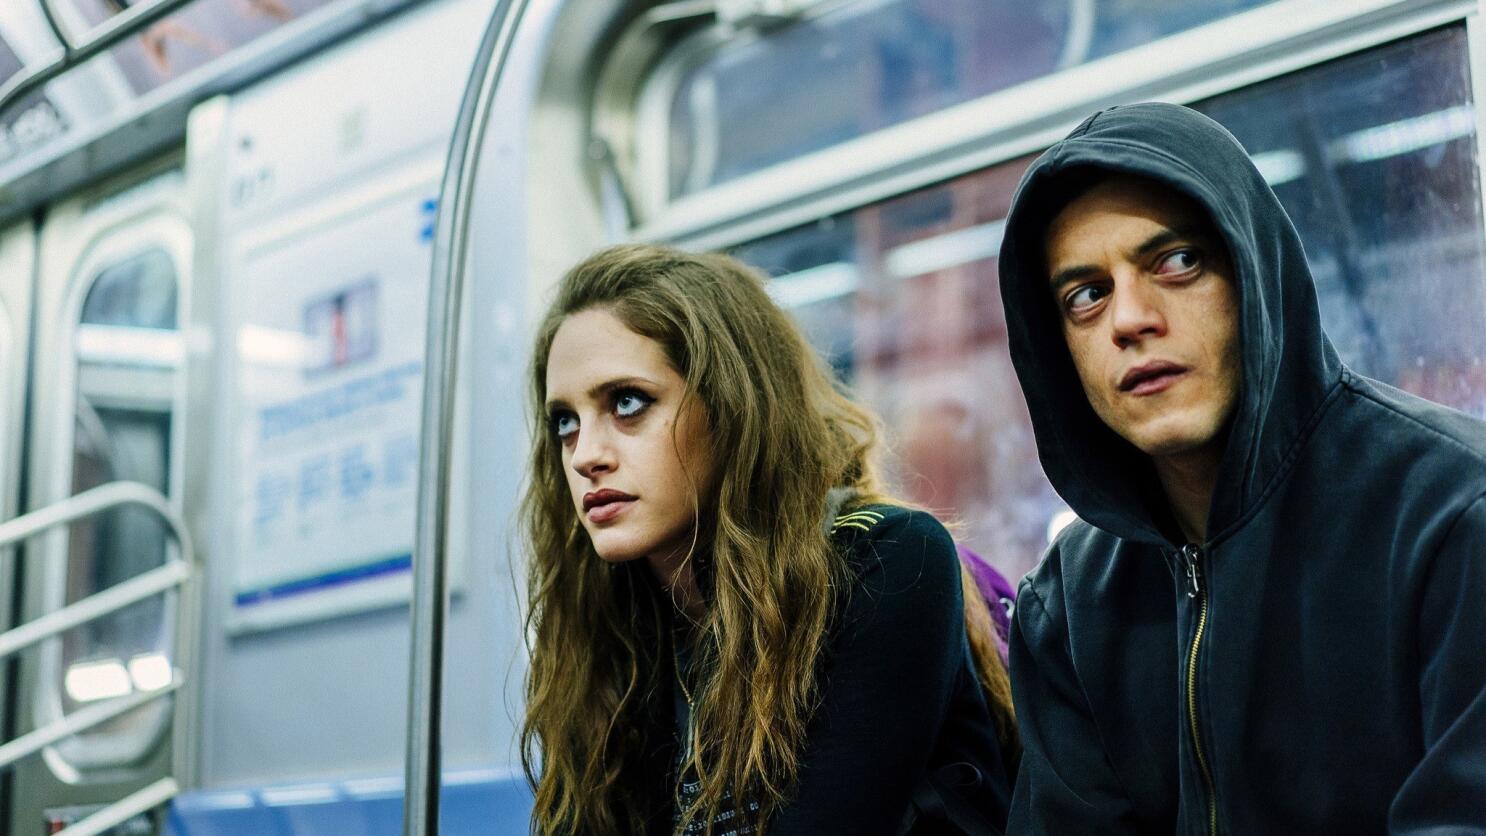 Mr. Robot To End After Season 4